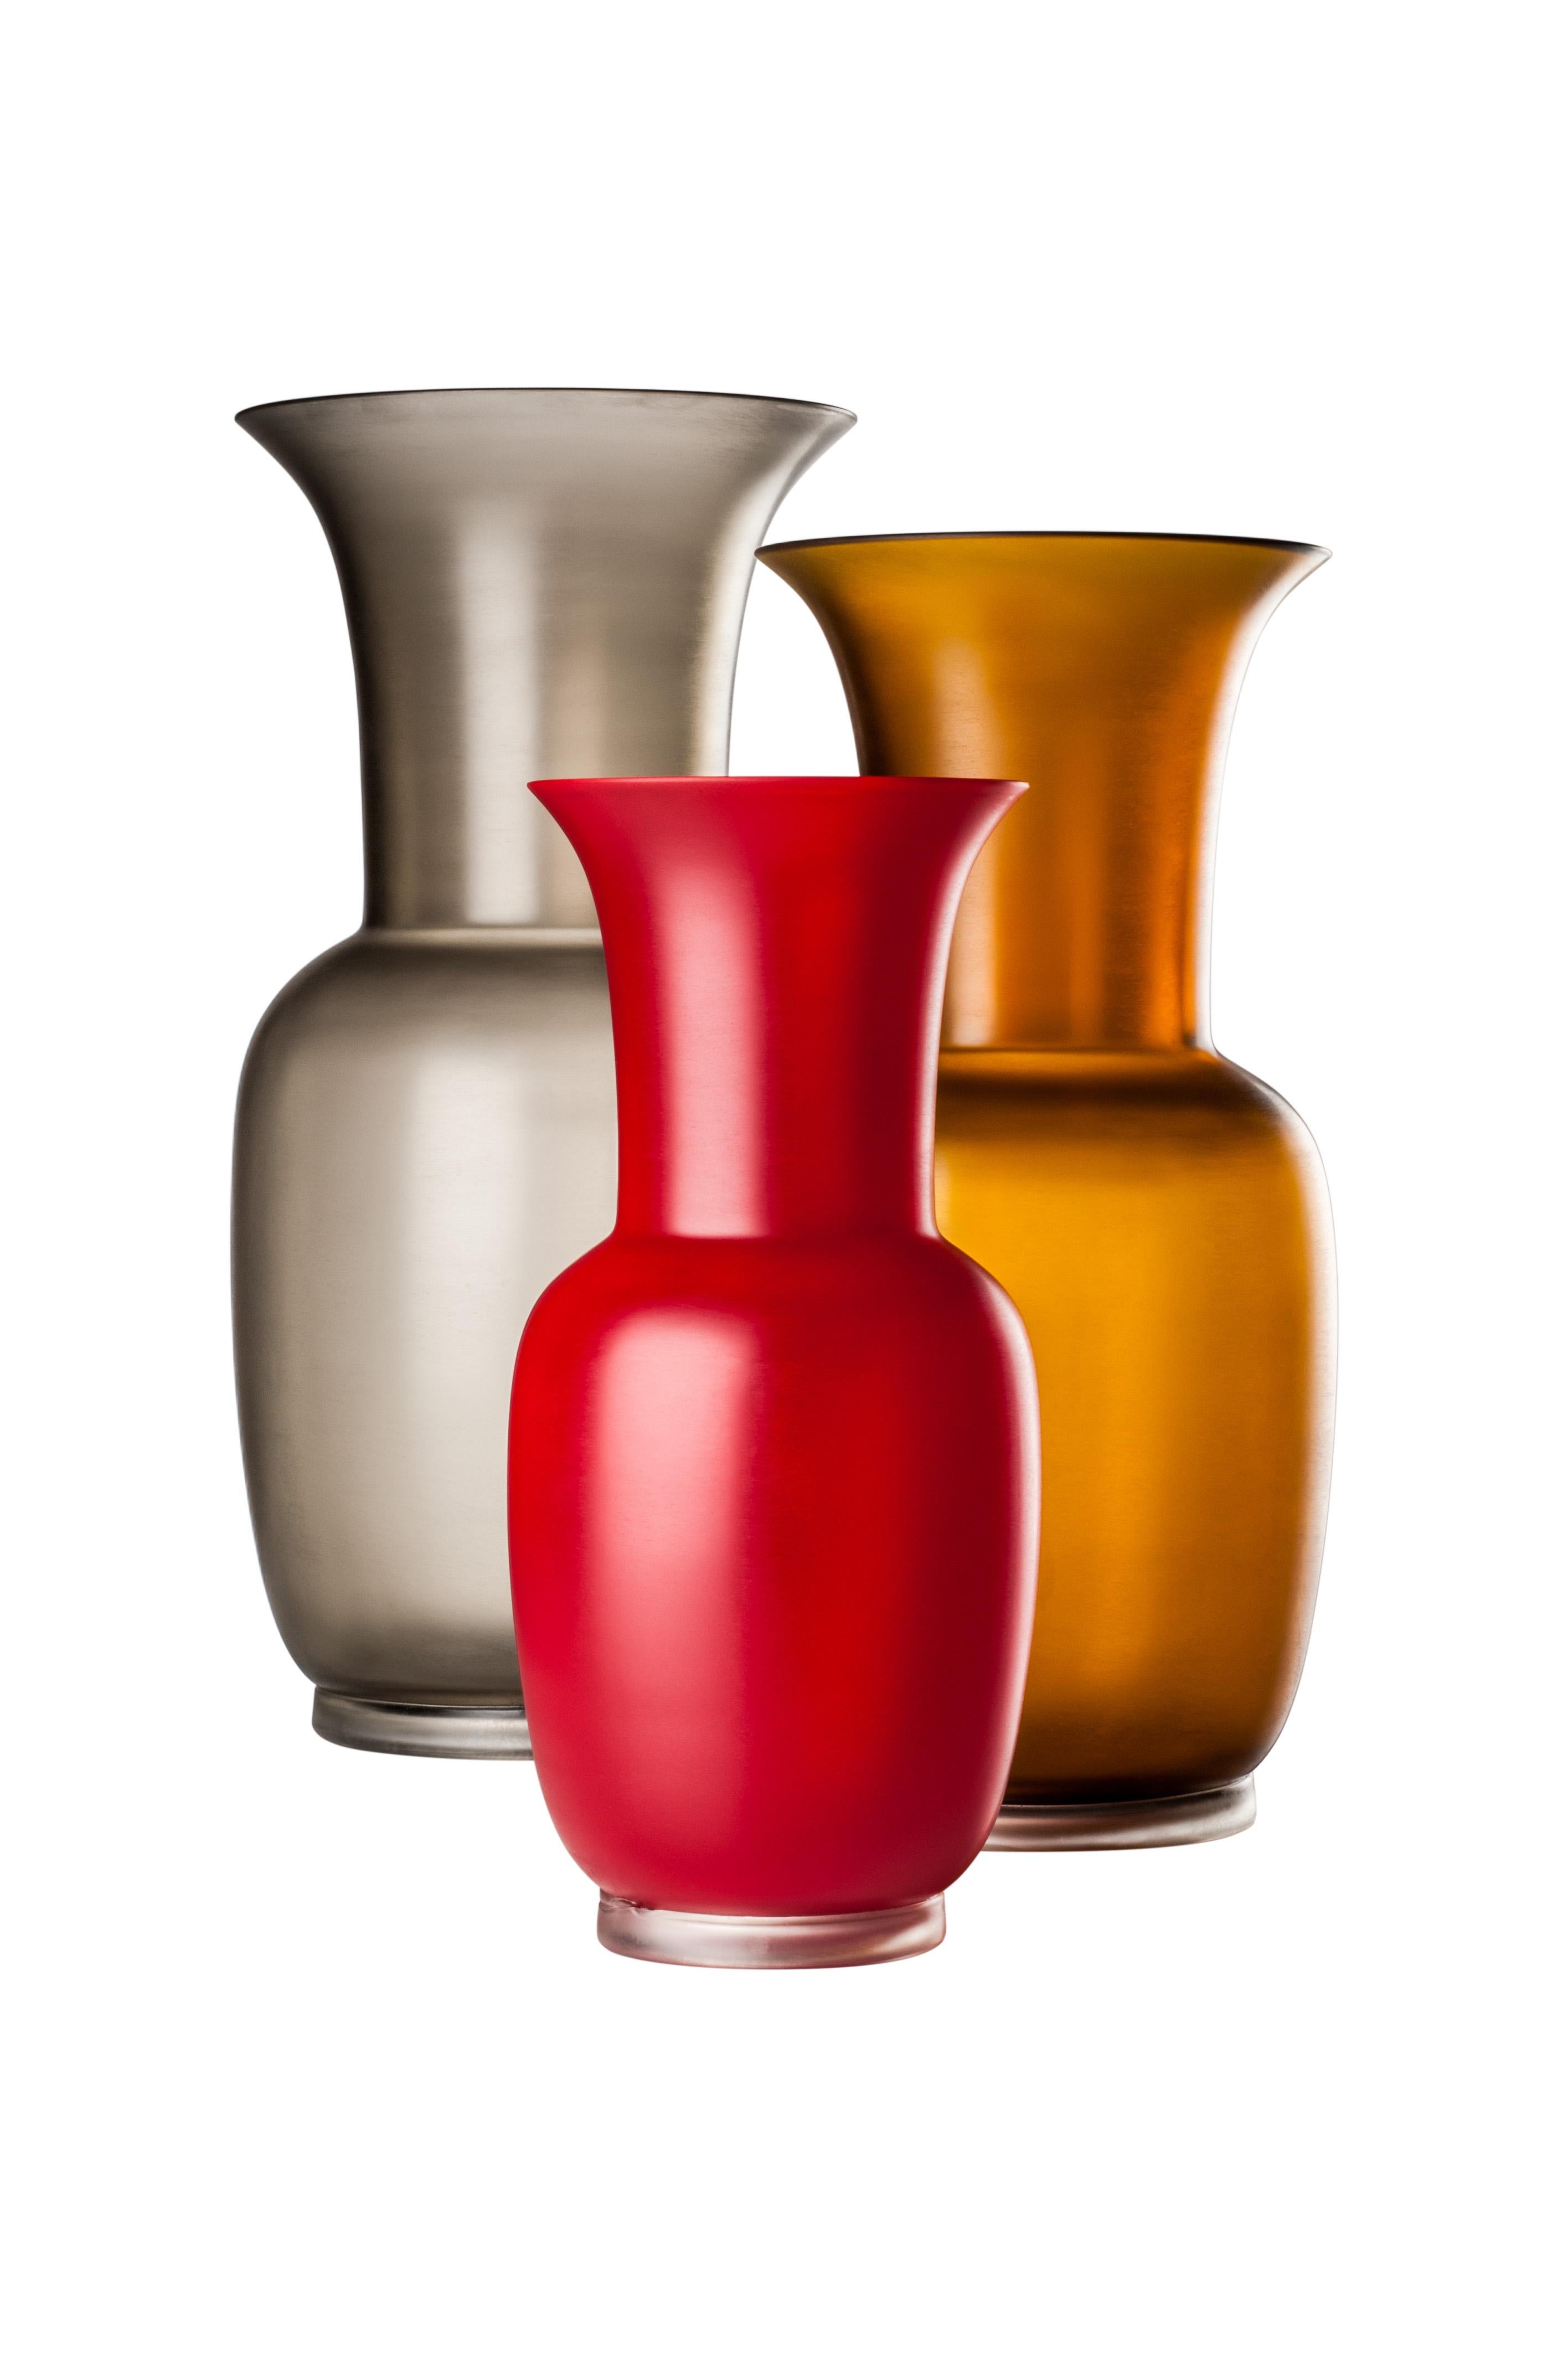 Satin glass vase, designed and manufactured by Venini, features the same shape of the iconic opalino vase with a frosted finish.
Indoor use only.

Dimensions: Ø 20 cm, H 42 cm.
        